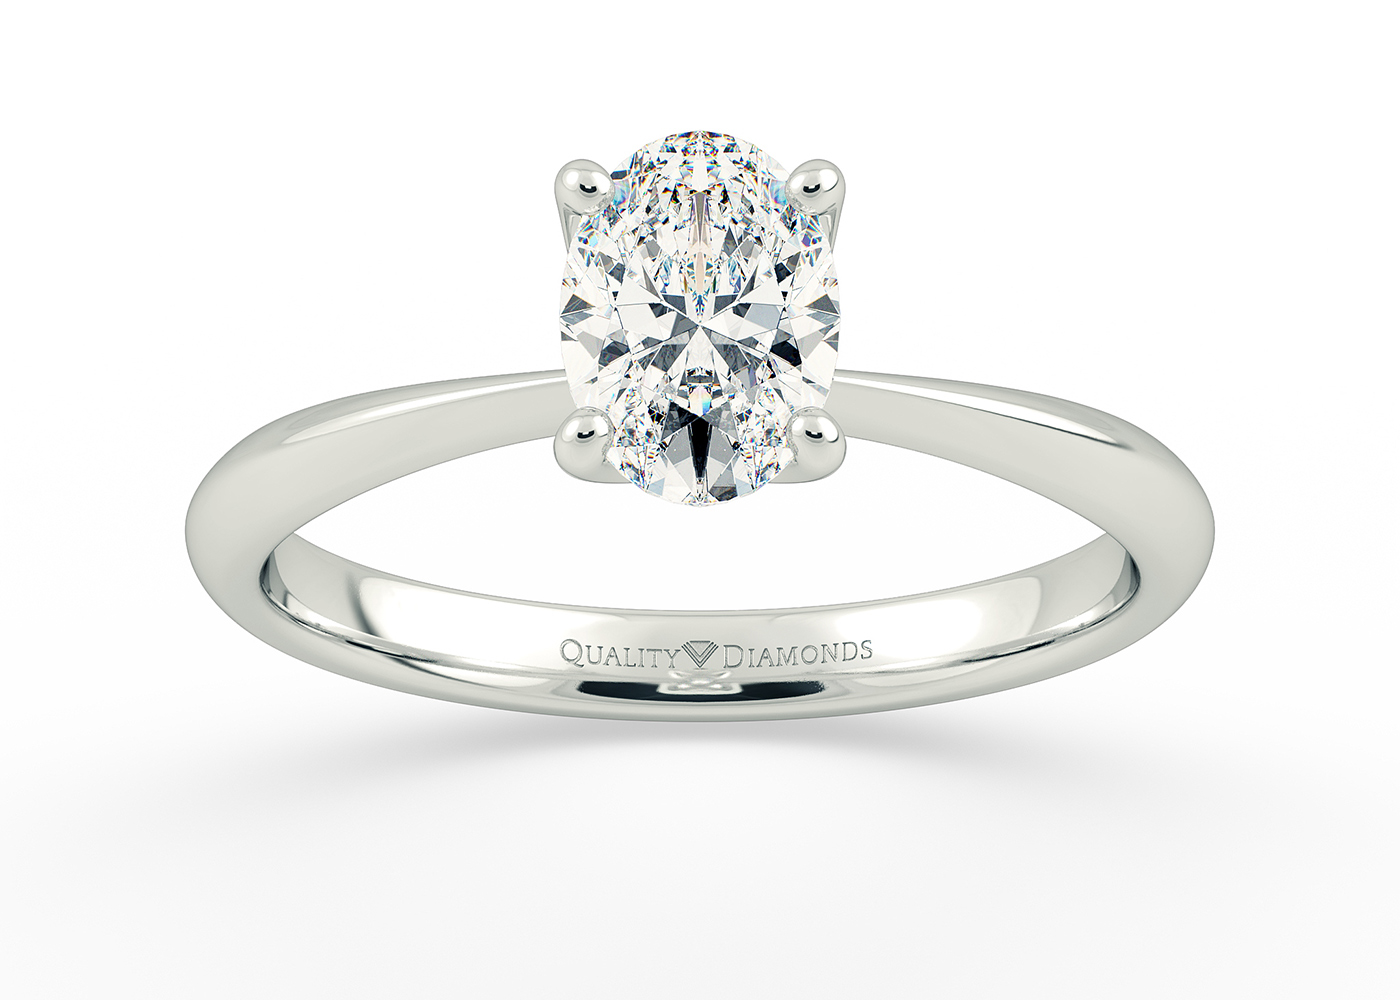 Half Carat Oval Solitaire Diamond Engagement Ring in 9K White Gold